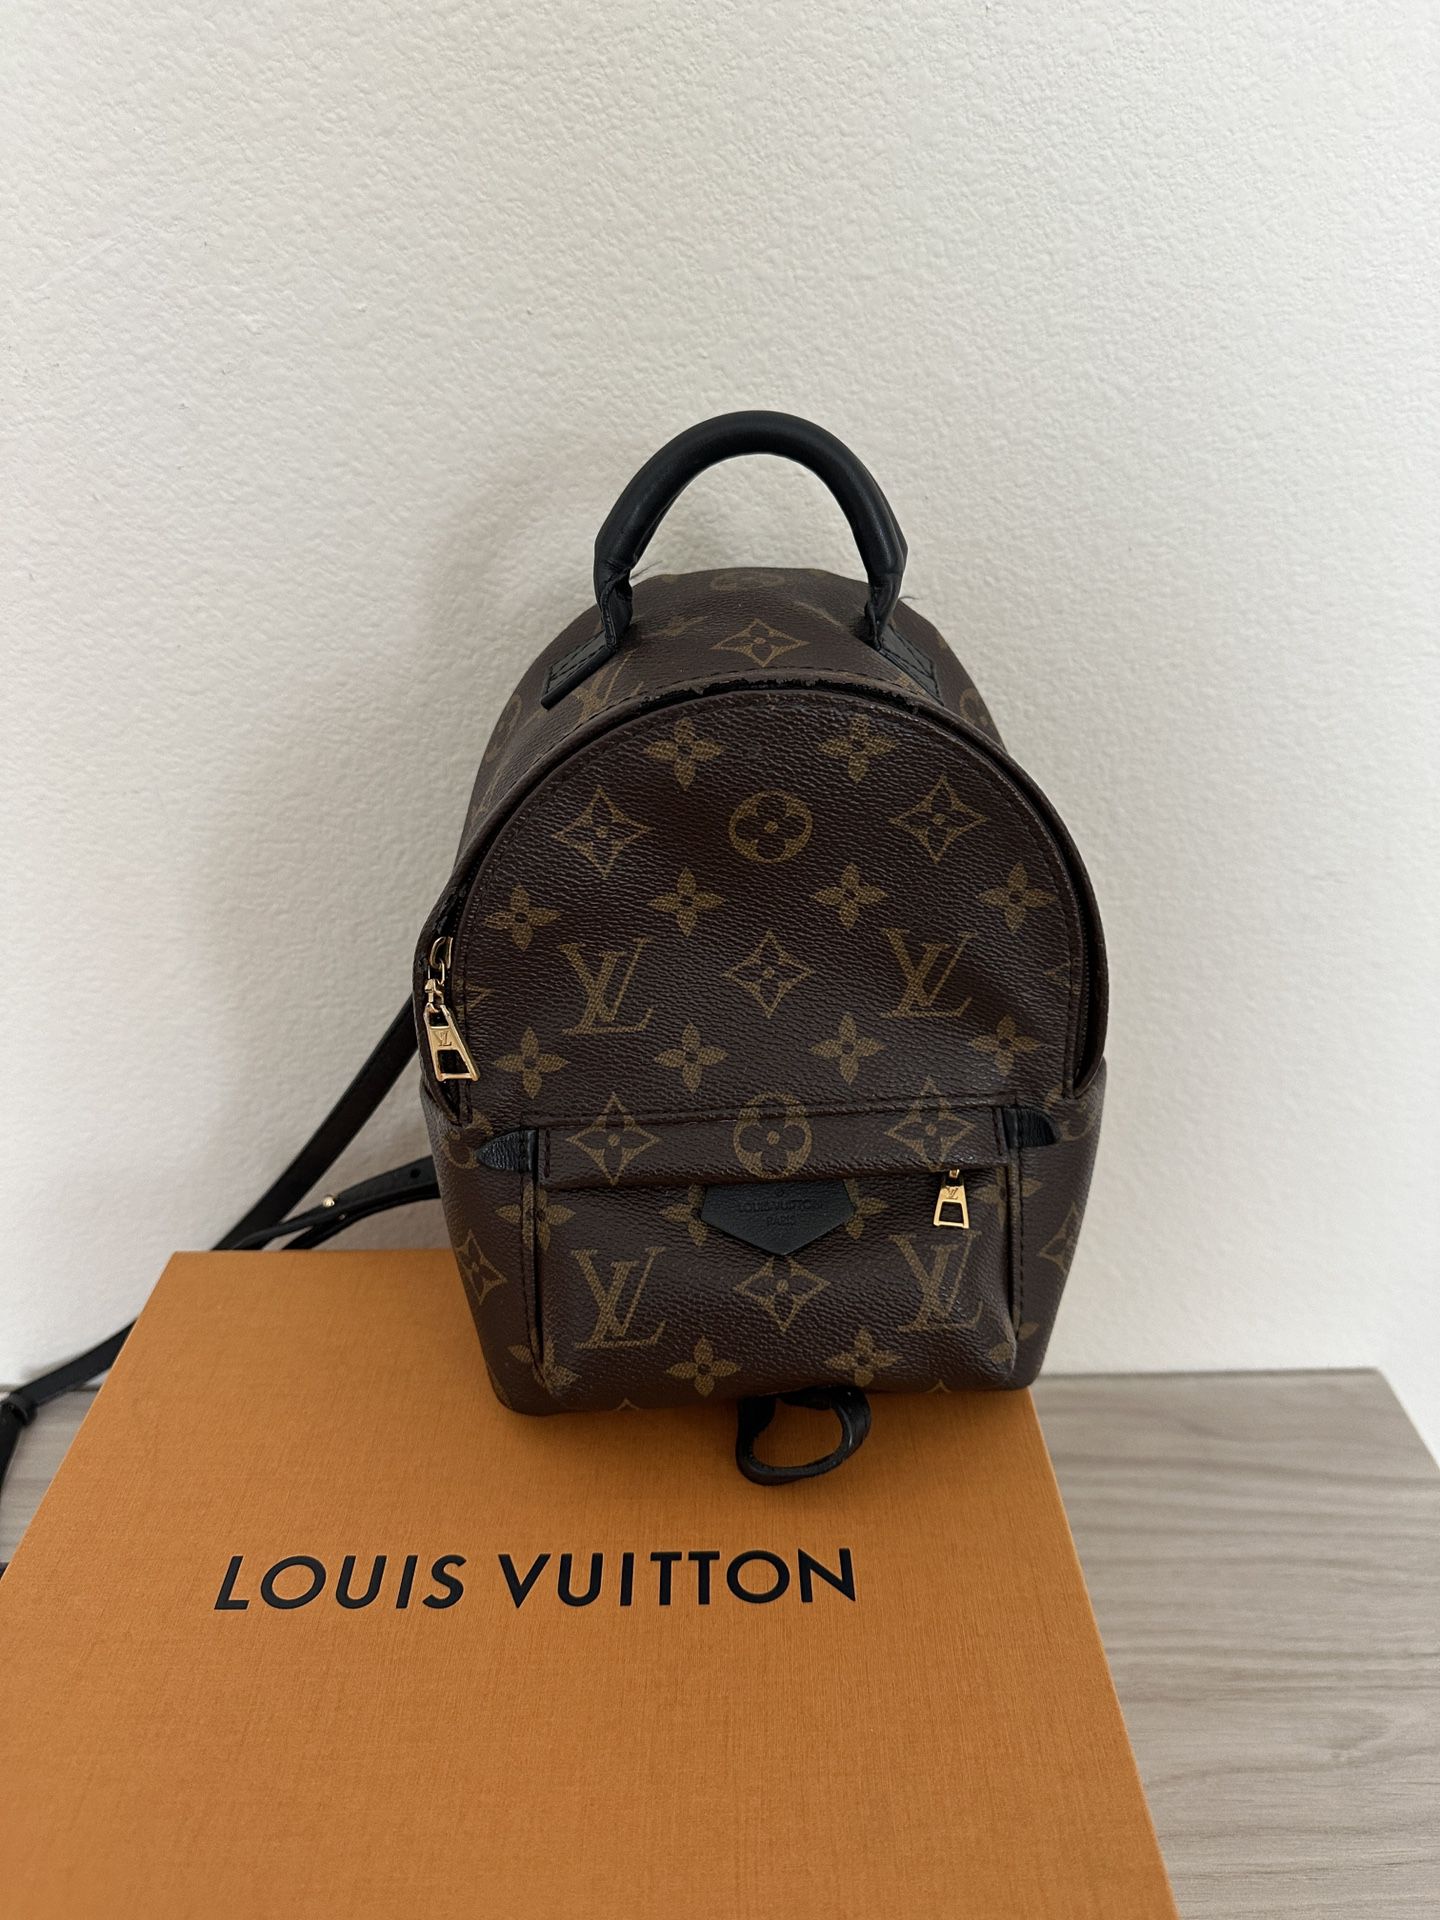 Louis Vuitton Palm Springs Backpack Authentic Damaged